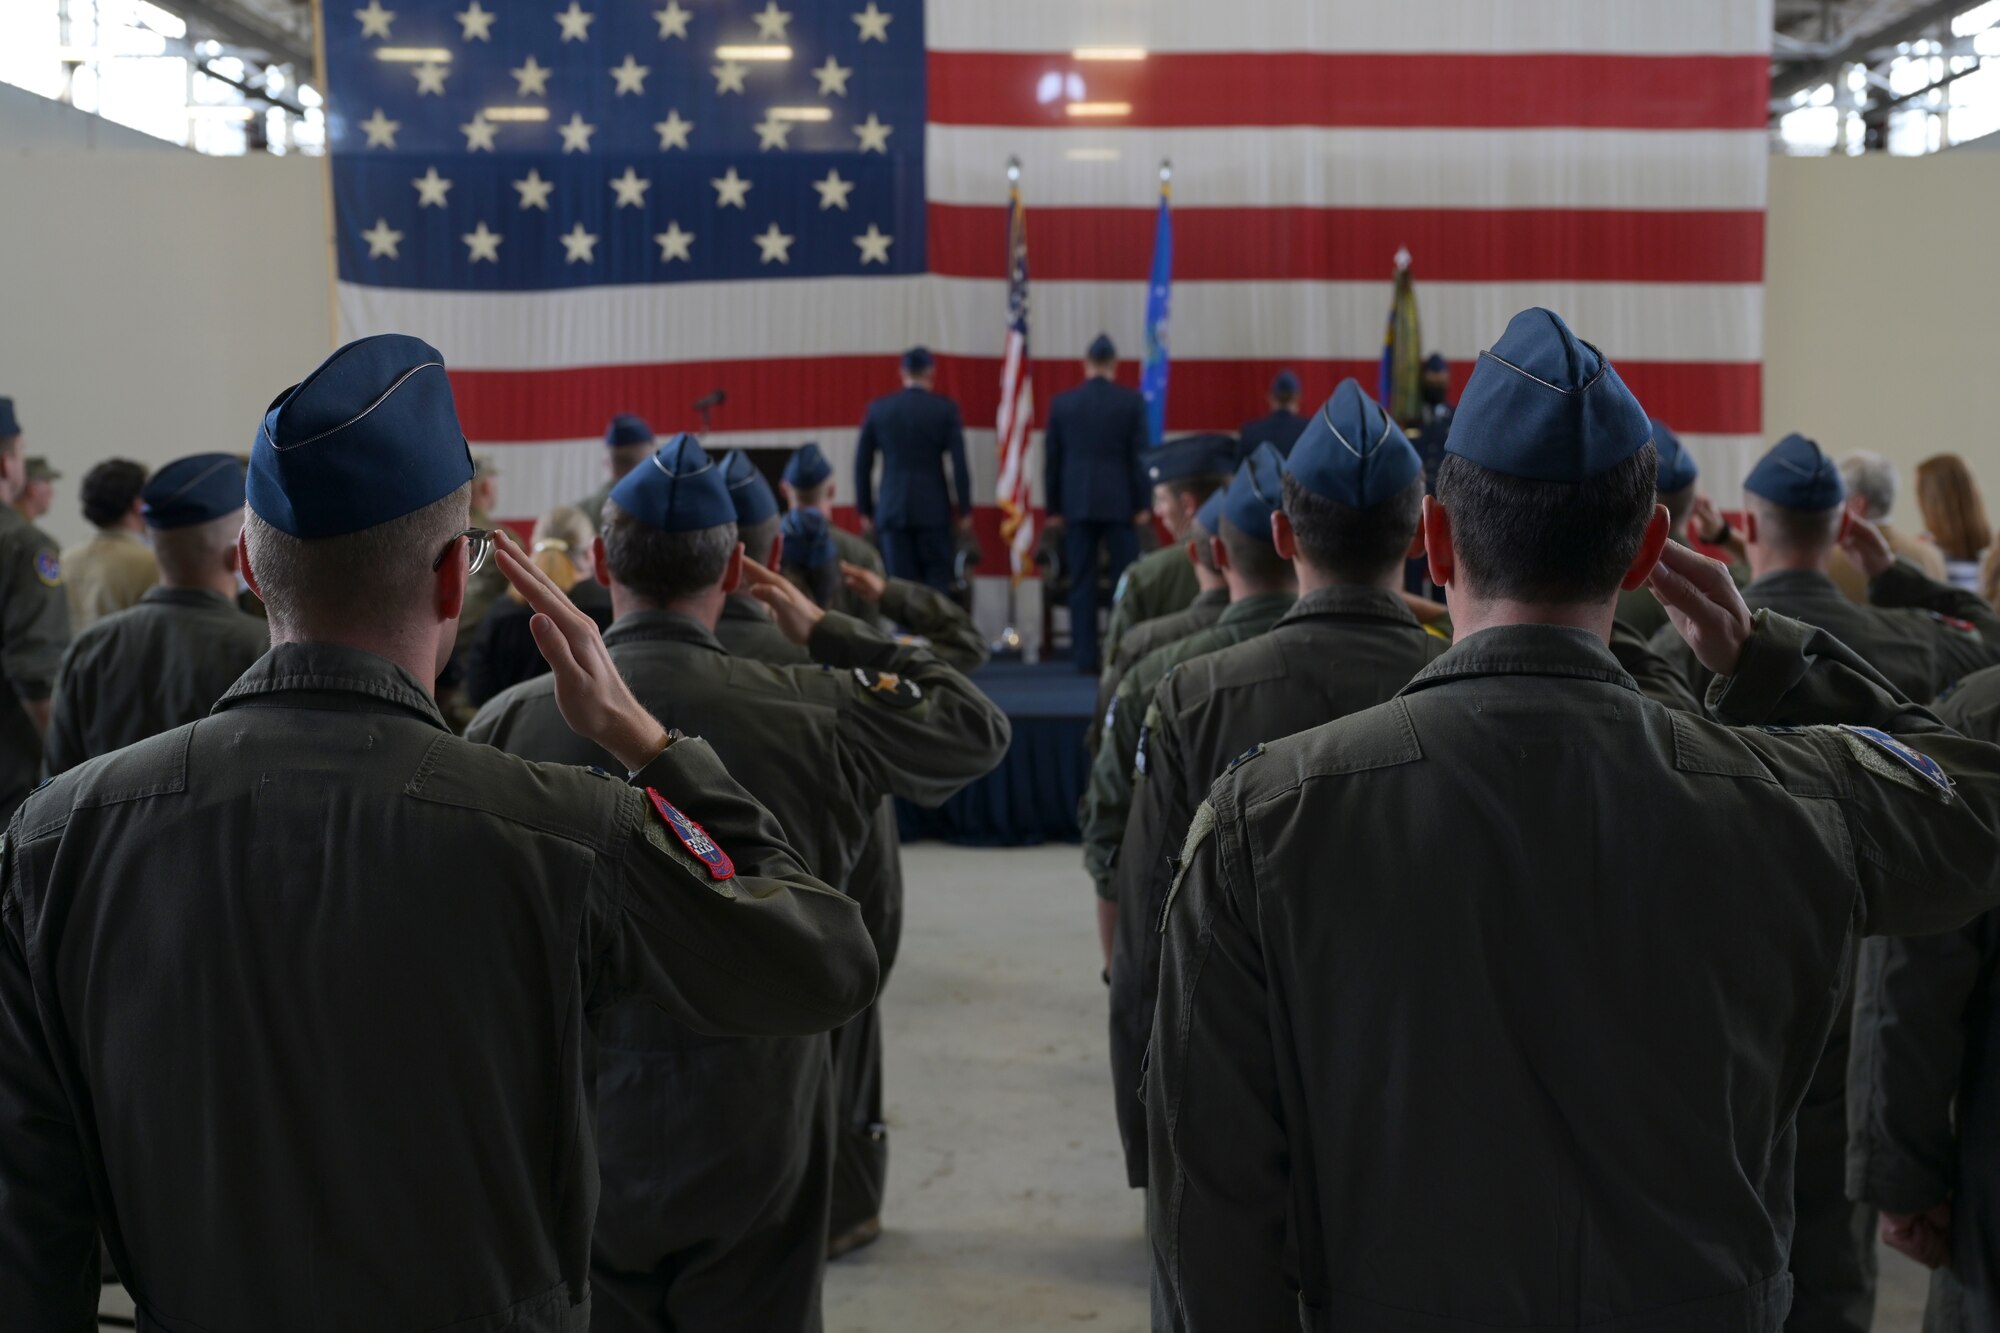 Airmen from the 37th Flying Training Squadron and audience members salute during the playing of the national anthem at the 37th FTS change of command ceremony May 27, 2021, on Columbus Air Force Base, Miss. The 37th FTS conducts primary flight training in the T-6A Texan II where students learn basic aircraft characteristics and control, takeoff and landing techniques, aerobatics, and night, instrument and formation flying. (U.S. Air Force photo by Senior Airman Jake Jacobsen)